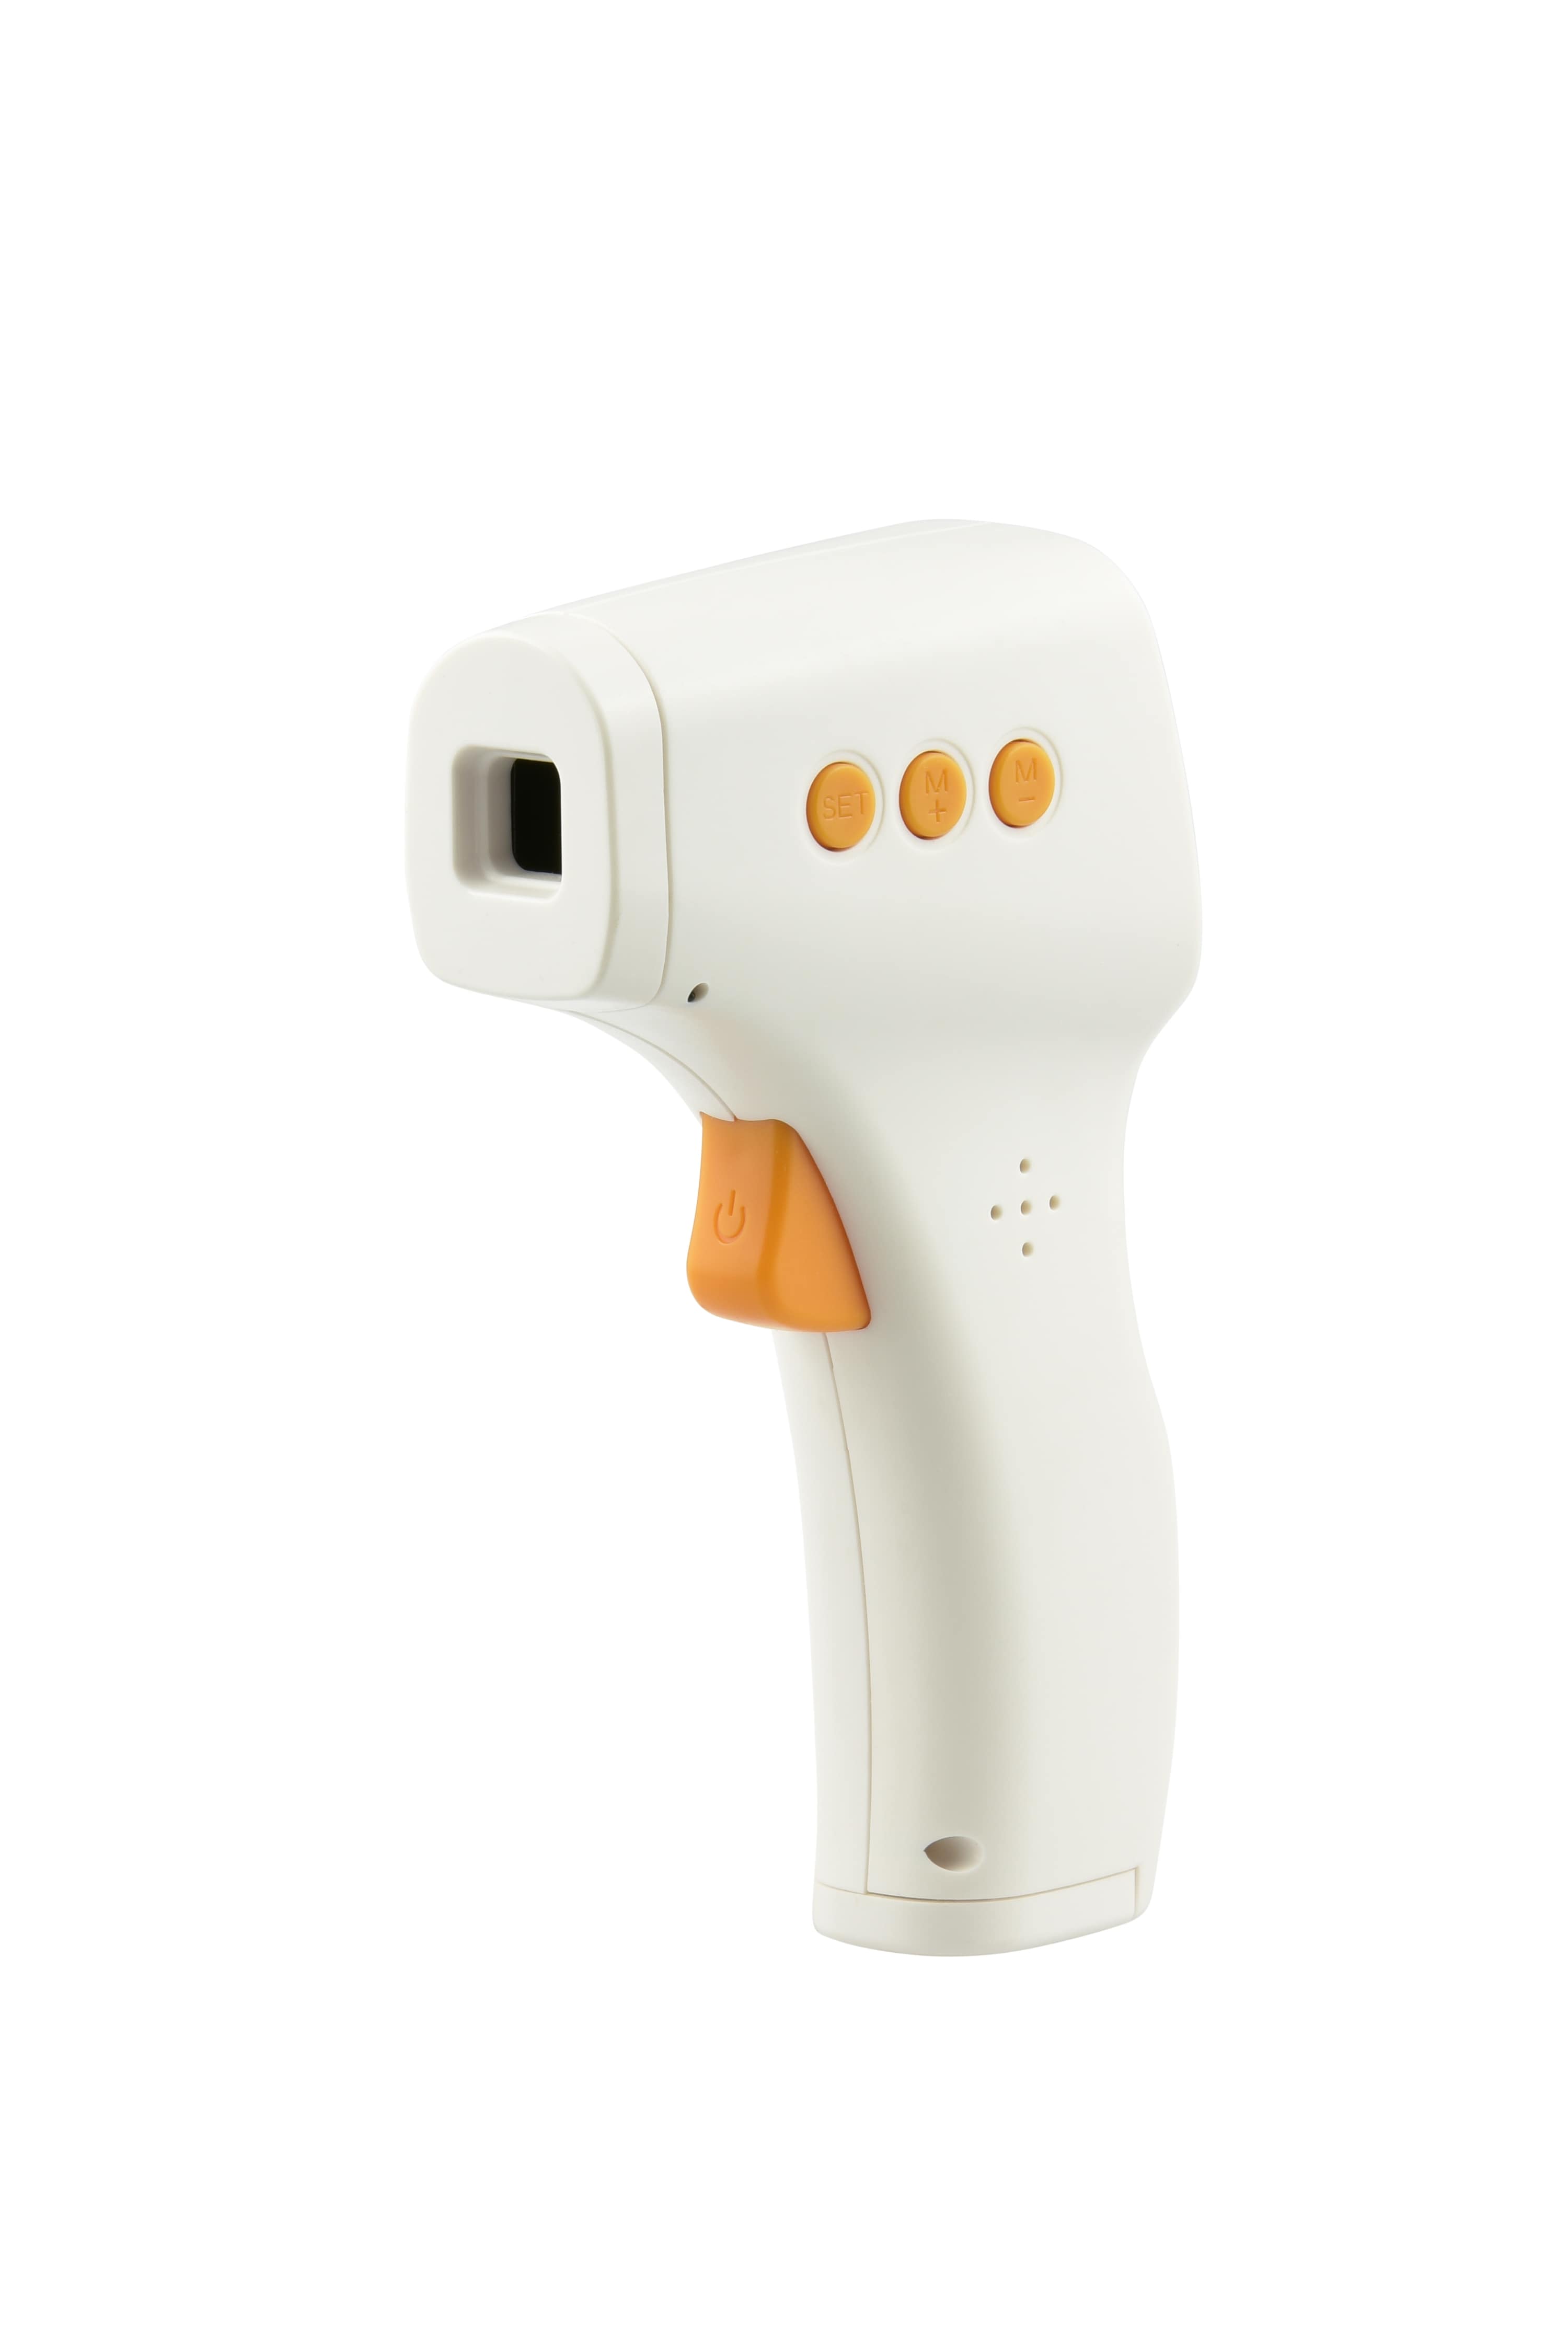 Able Infrared Thermometer